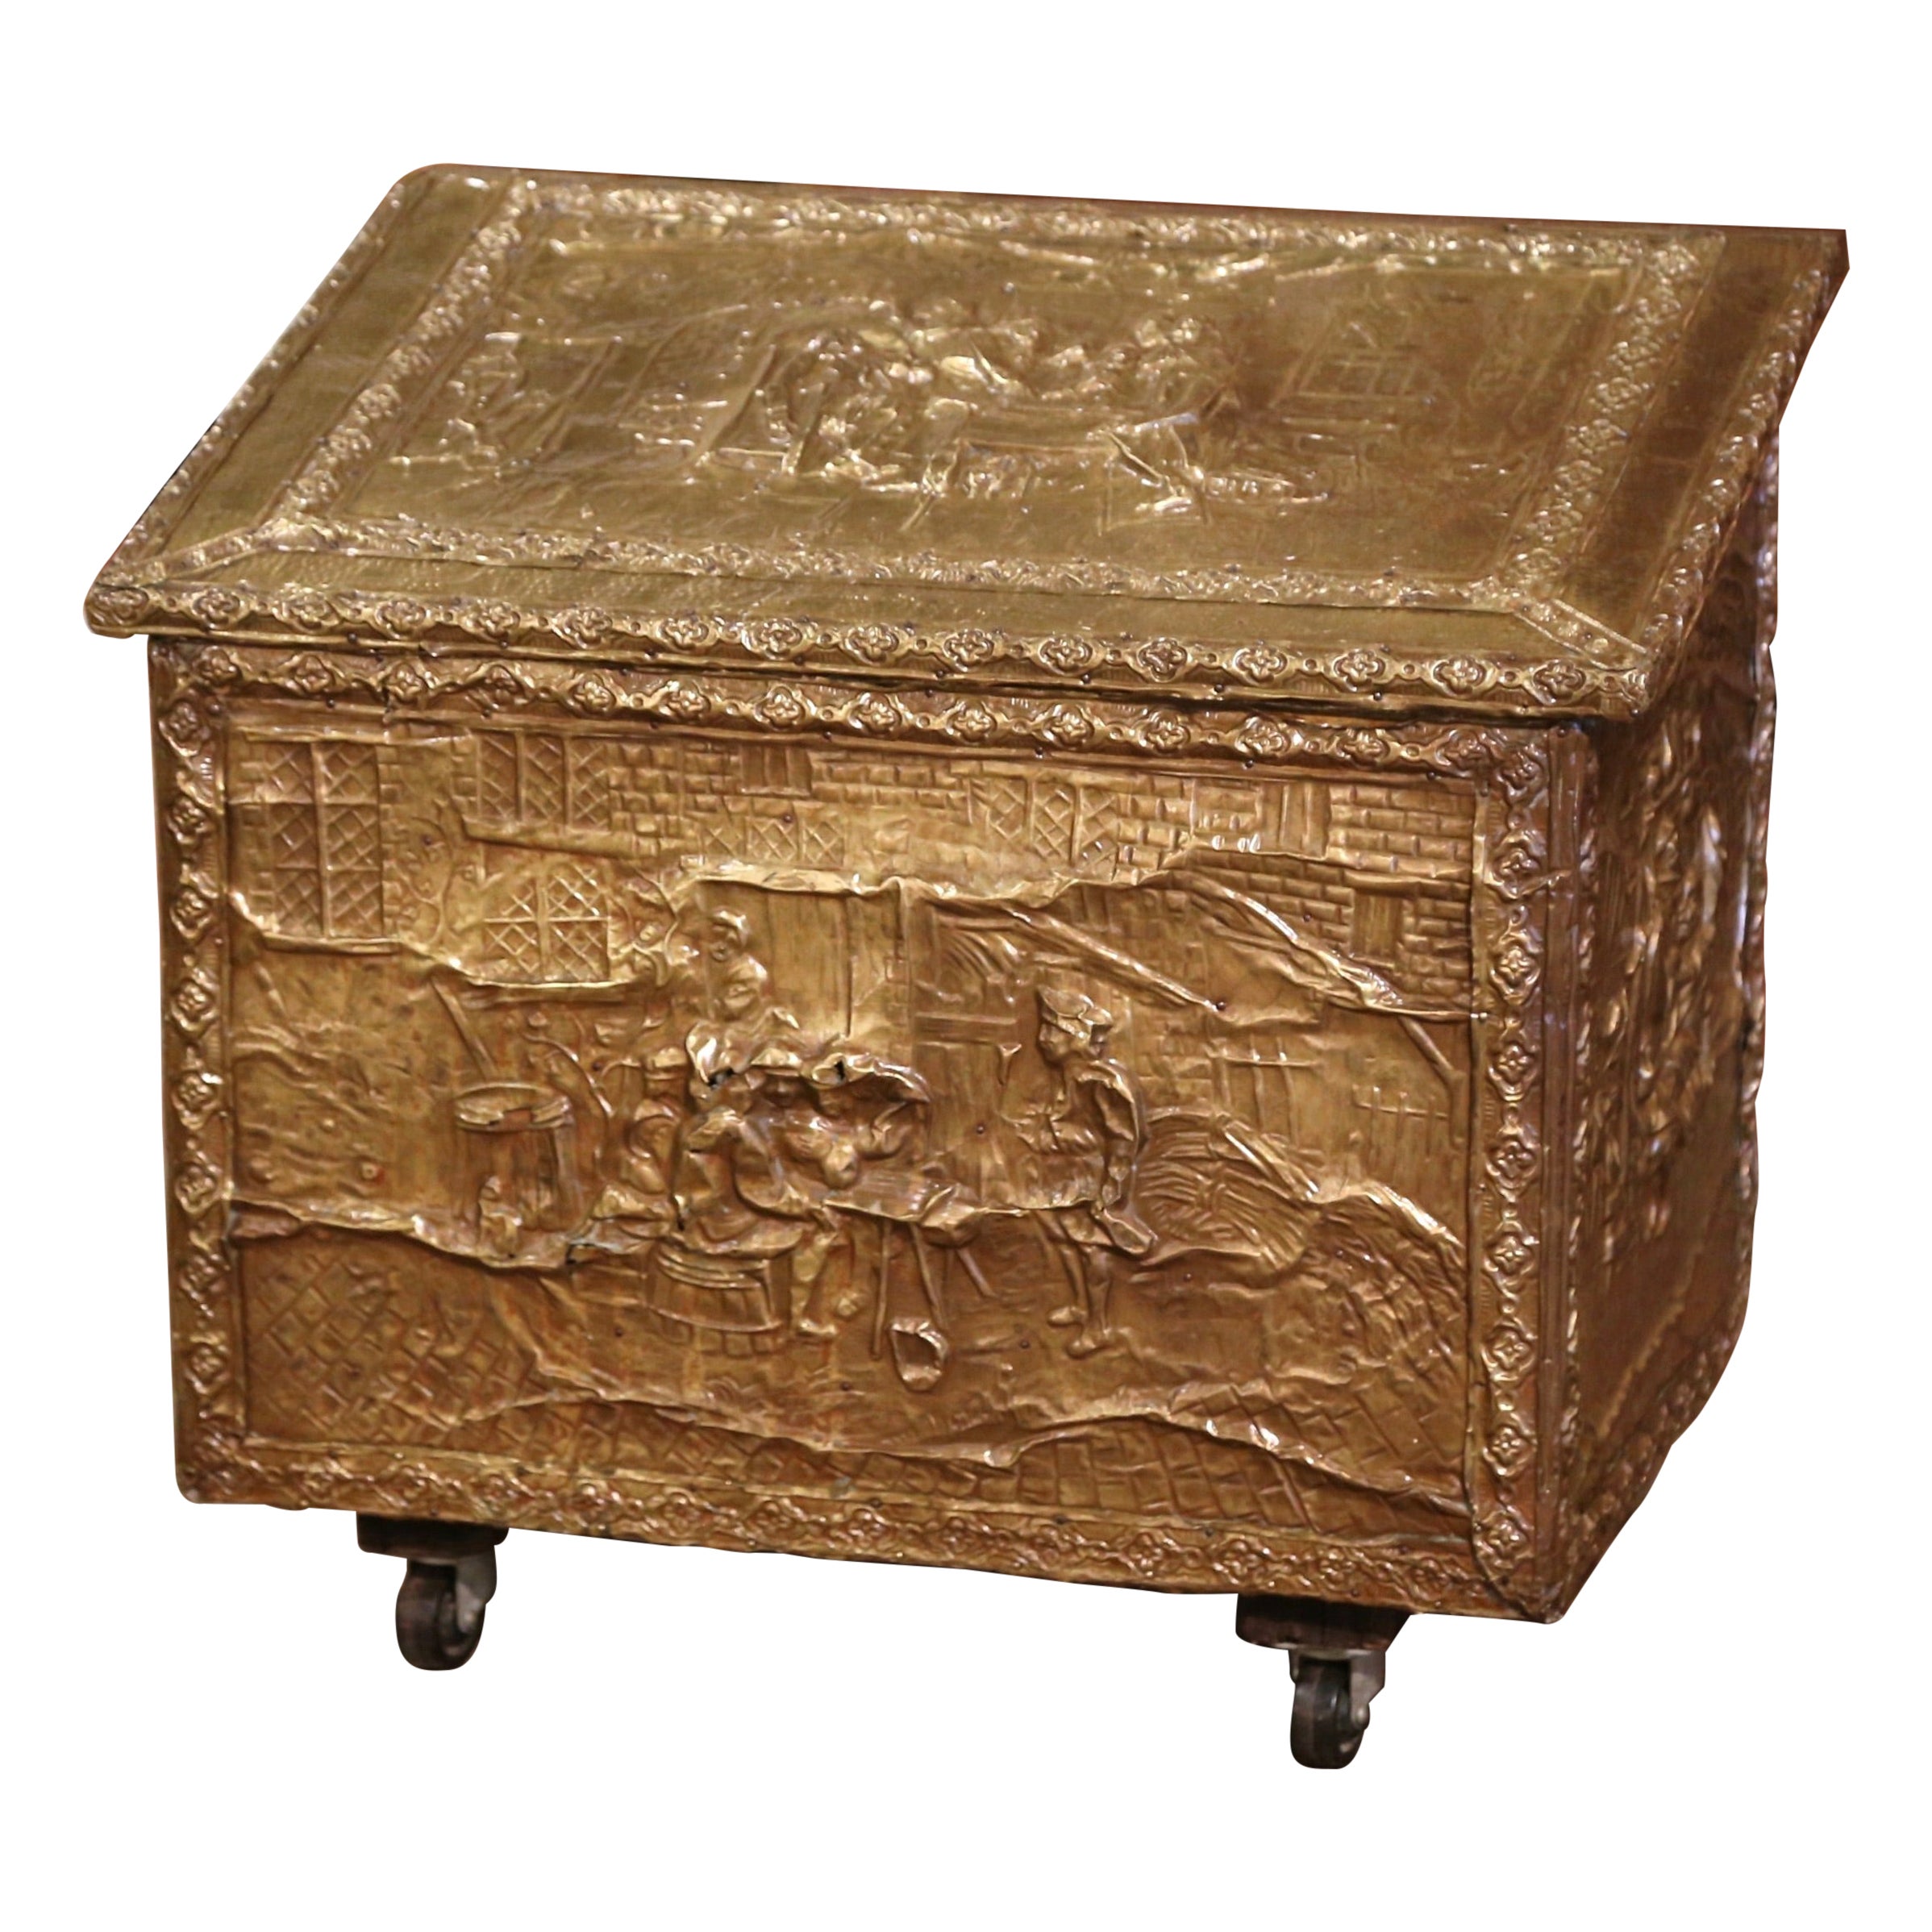 Early 20th Century French Repousse Brass and Wooden Firewood Box on Wheels For Sale